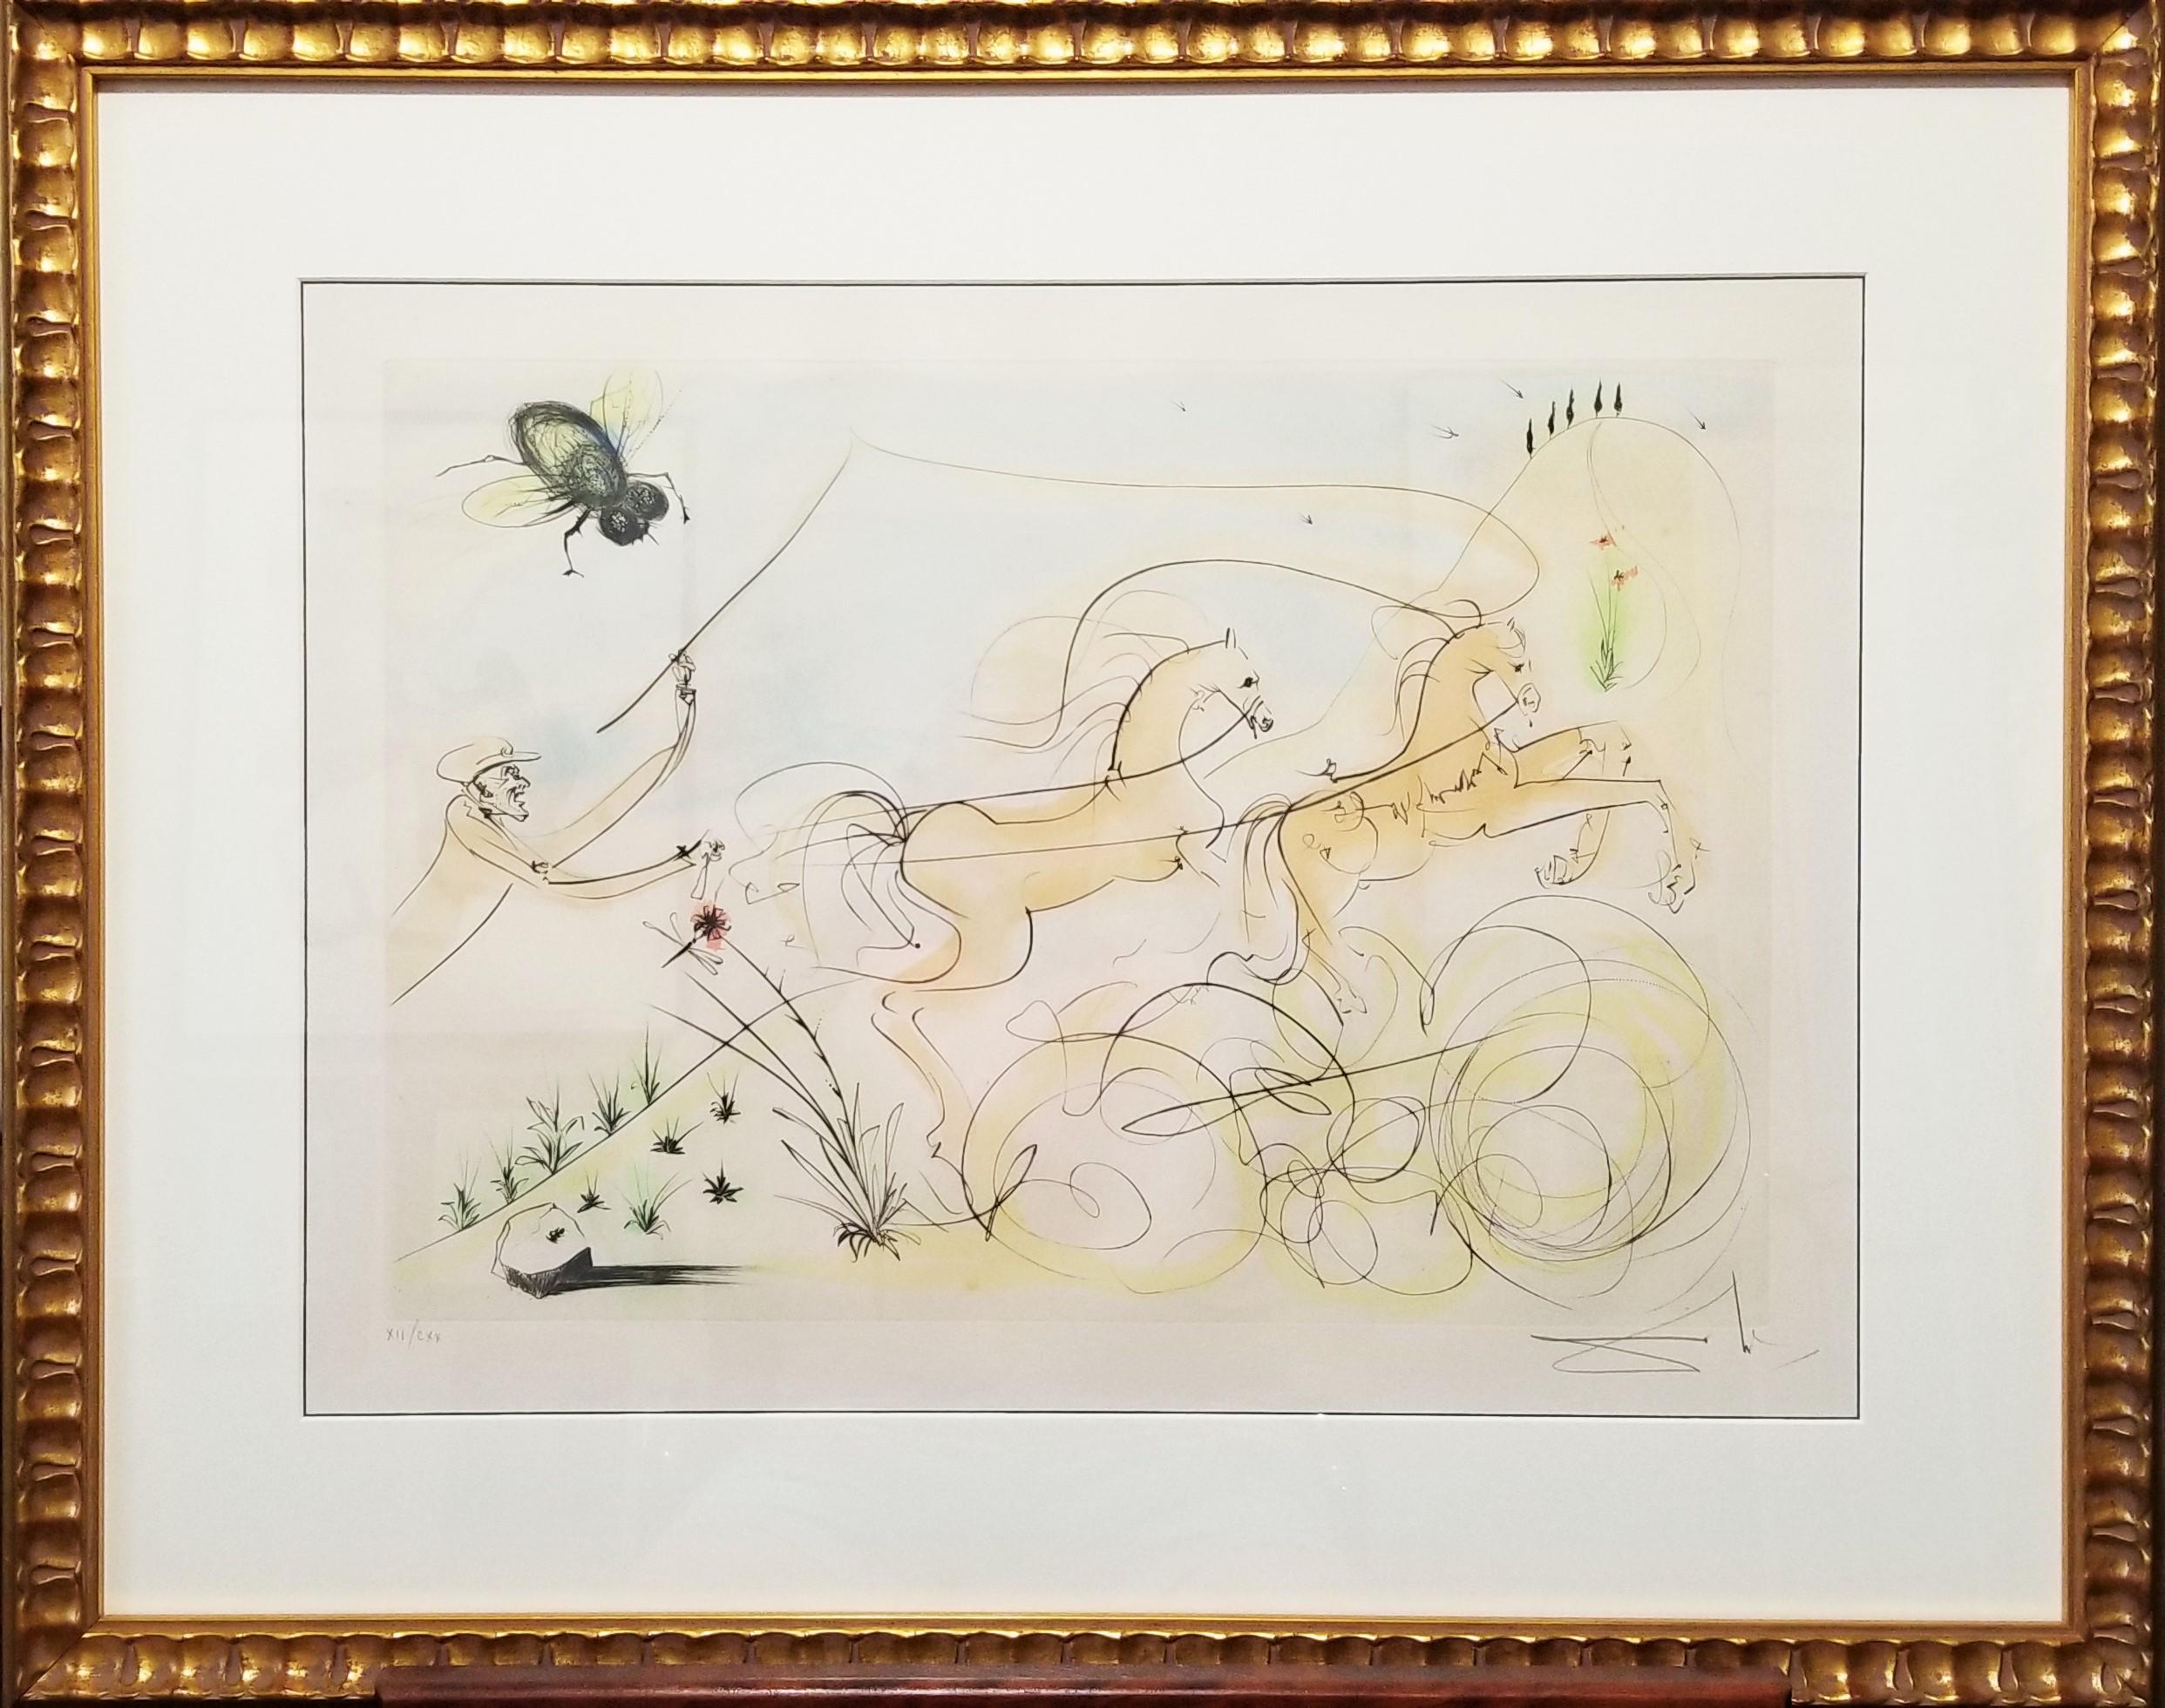 Le Coche et le Mouche (The Coach and the Fly) - Print by Salvador Dalí